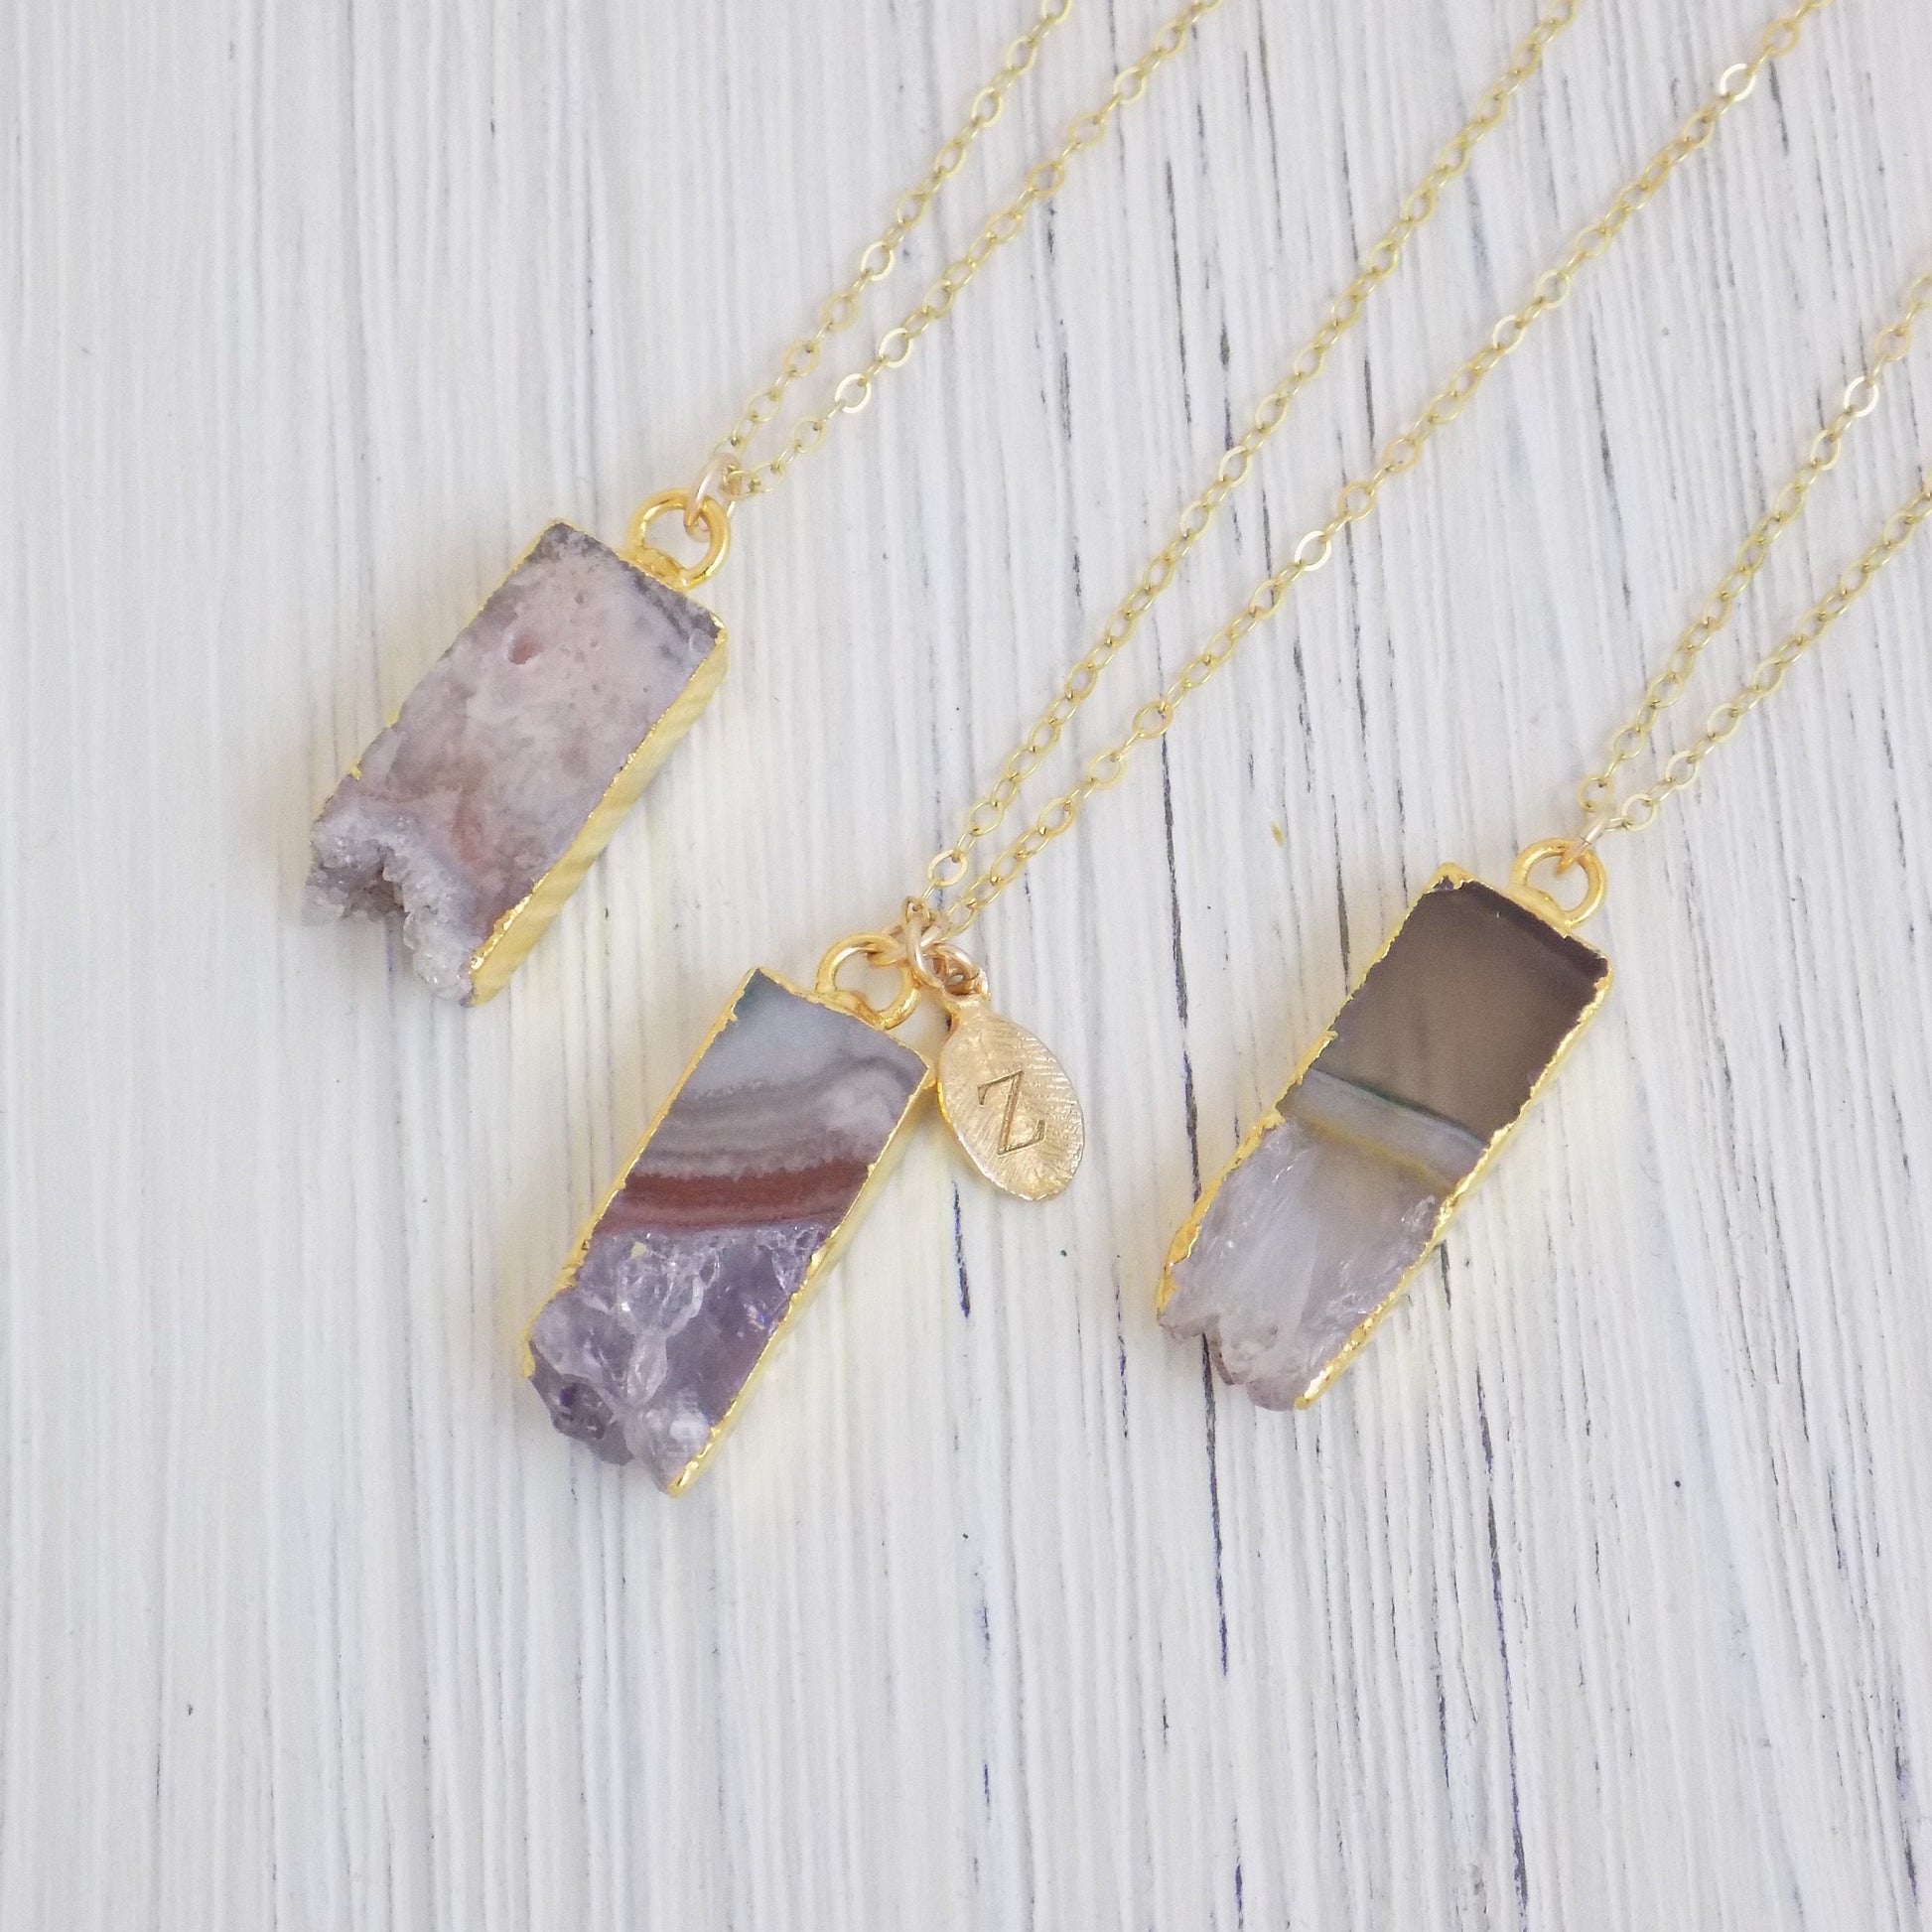 Amethyst Necklace, Personalized Necklace, Boho Raw Amethyst Pendant, February Birthstone, Druzy Necklace, Gold Layer, Gift For Women, R14-10